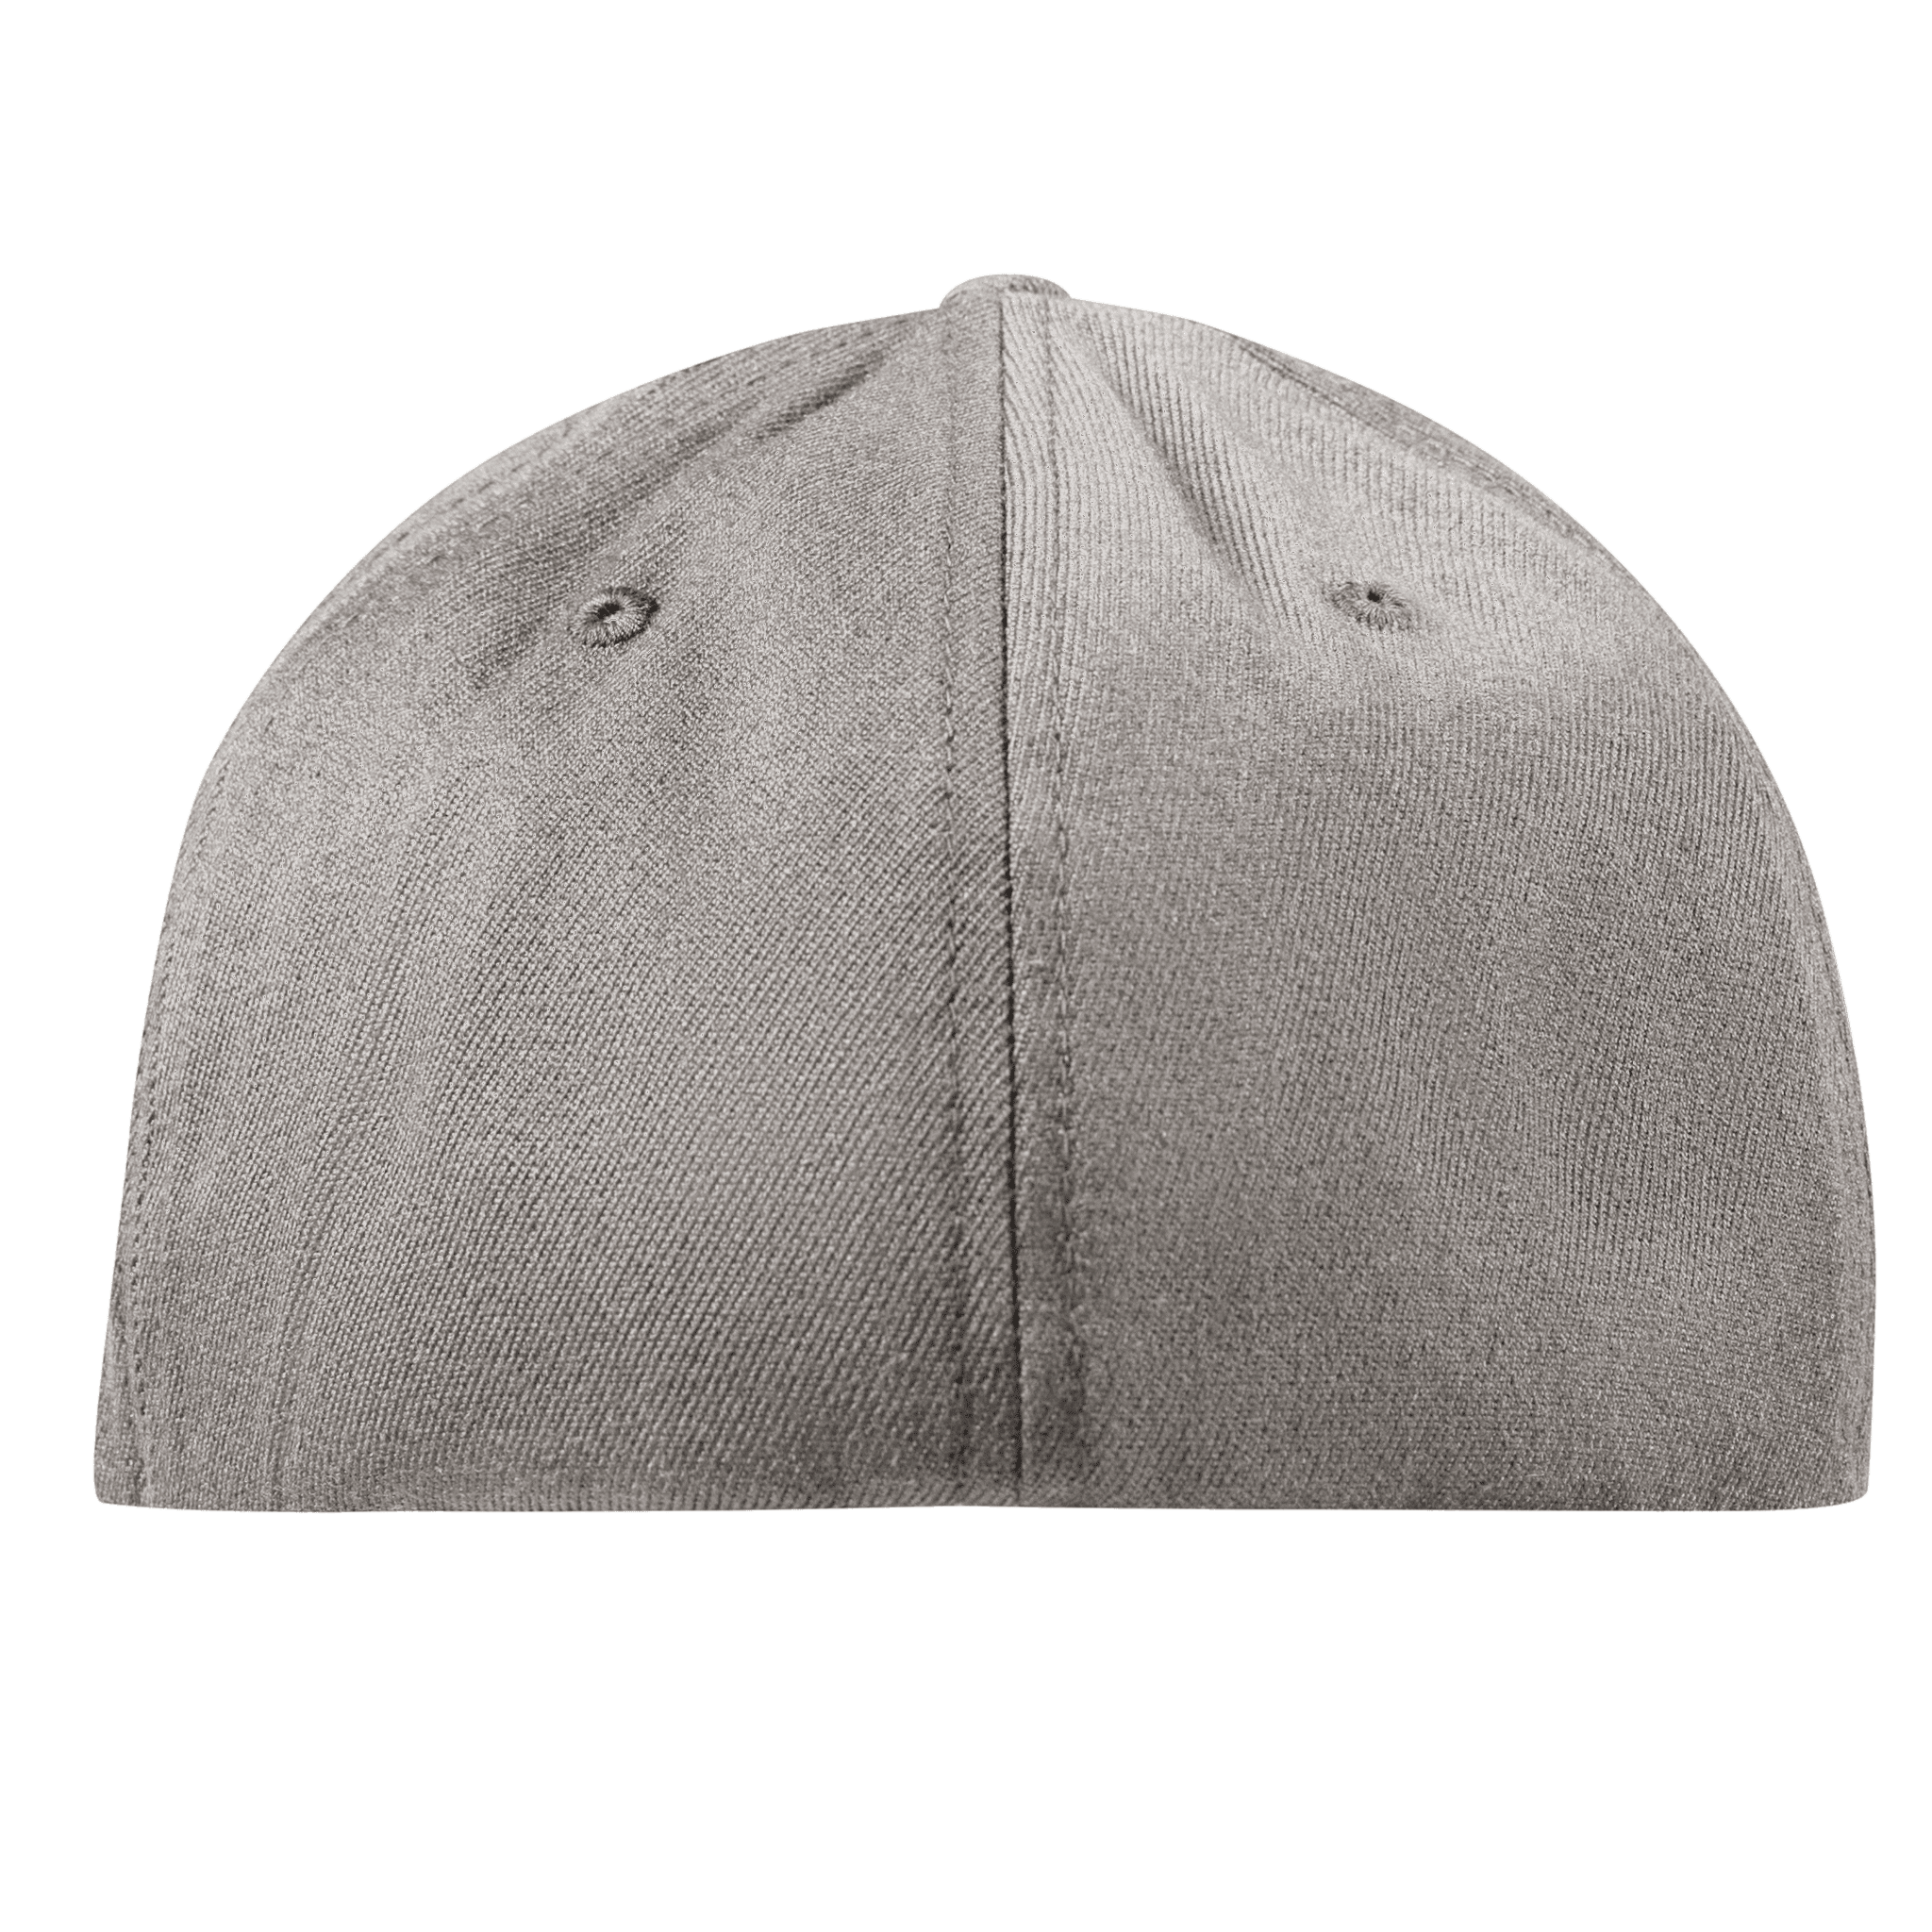 New York Compass Flexfit Fitted Back Heather Gray